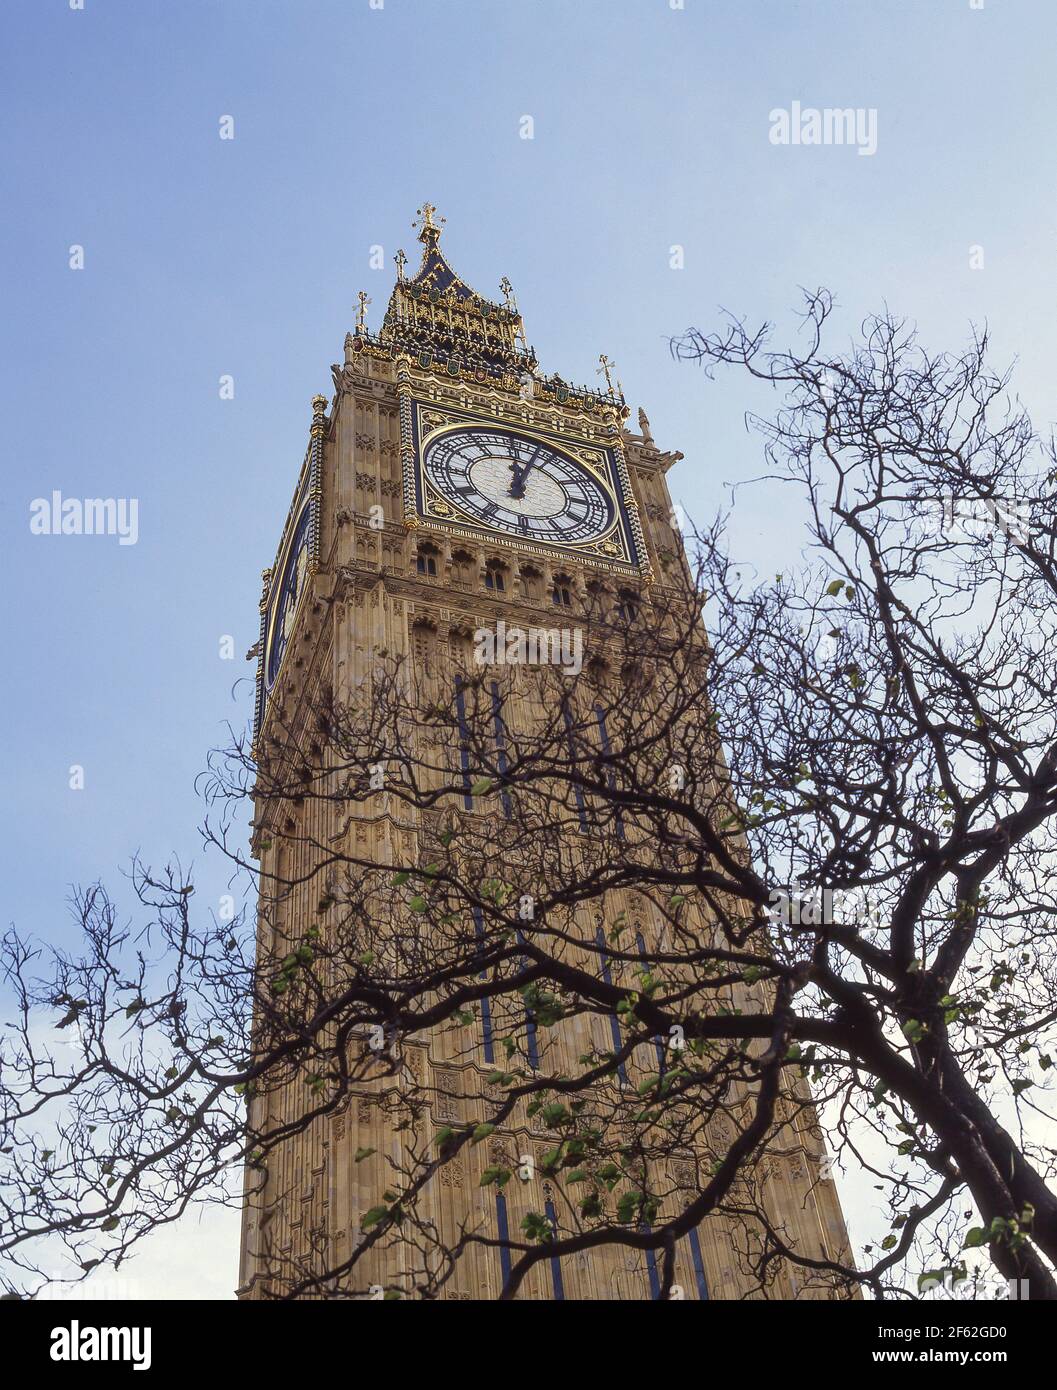 Big Ben clock tower, Houses of Parliament, Parliament Square, Westminster, City of Westminster, Greater London, England, United Kingdom Stock Photo